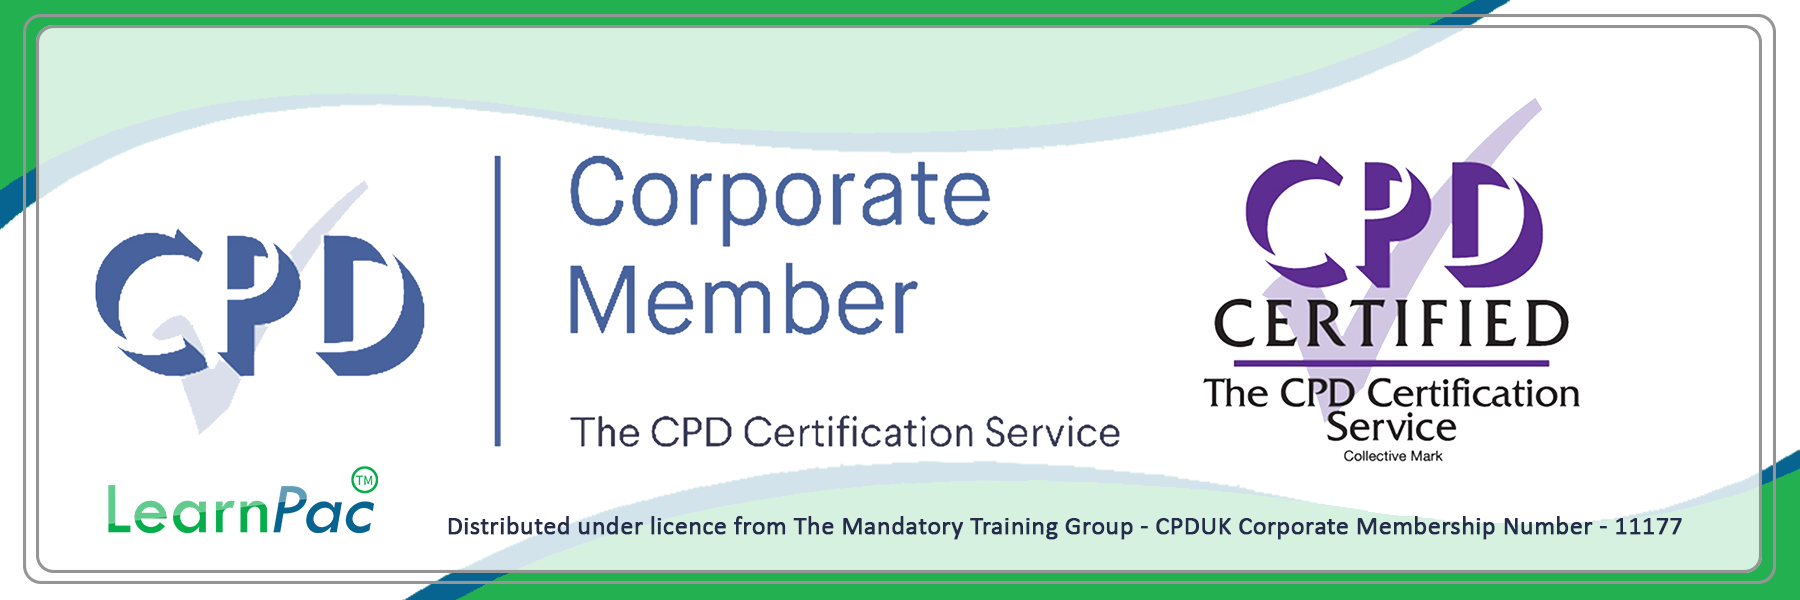 Mental Capacity Act - E-Learning Courses with Certificates - CPD Certified - LearnPac Systems UK -